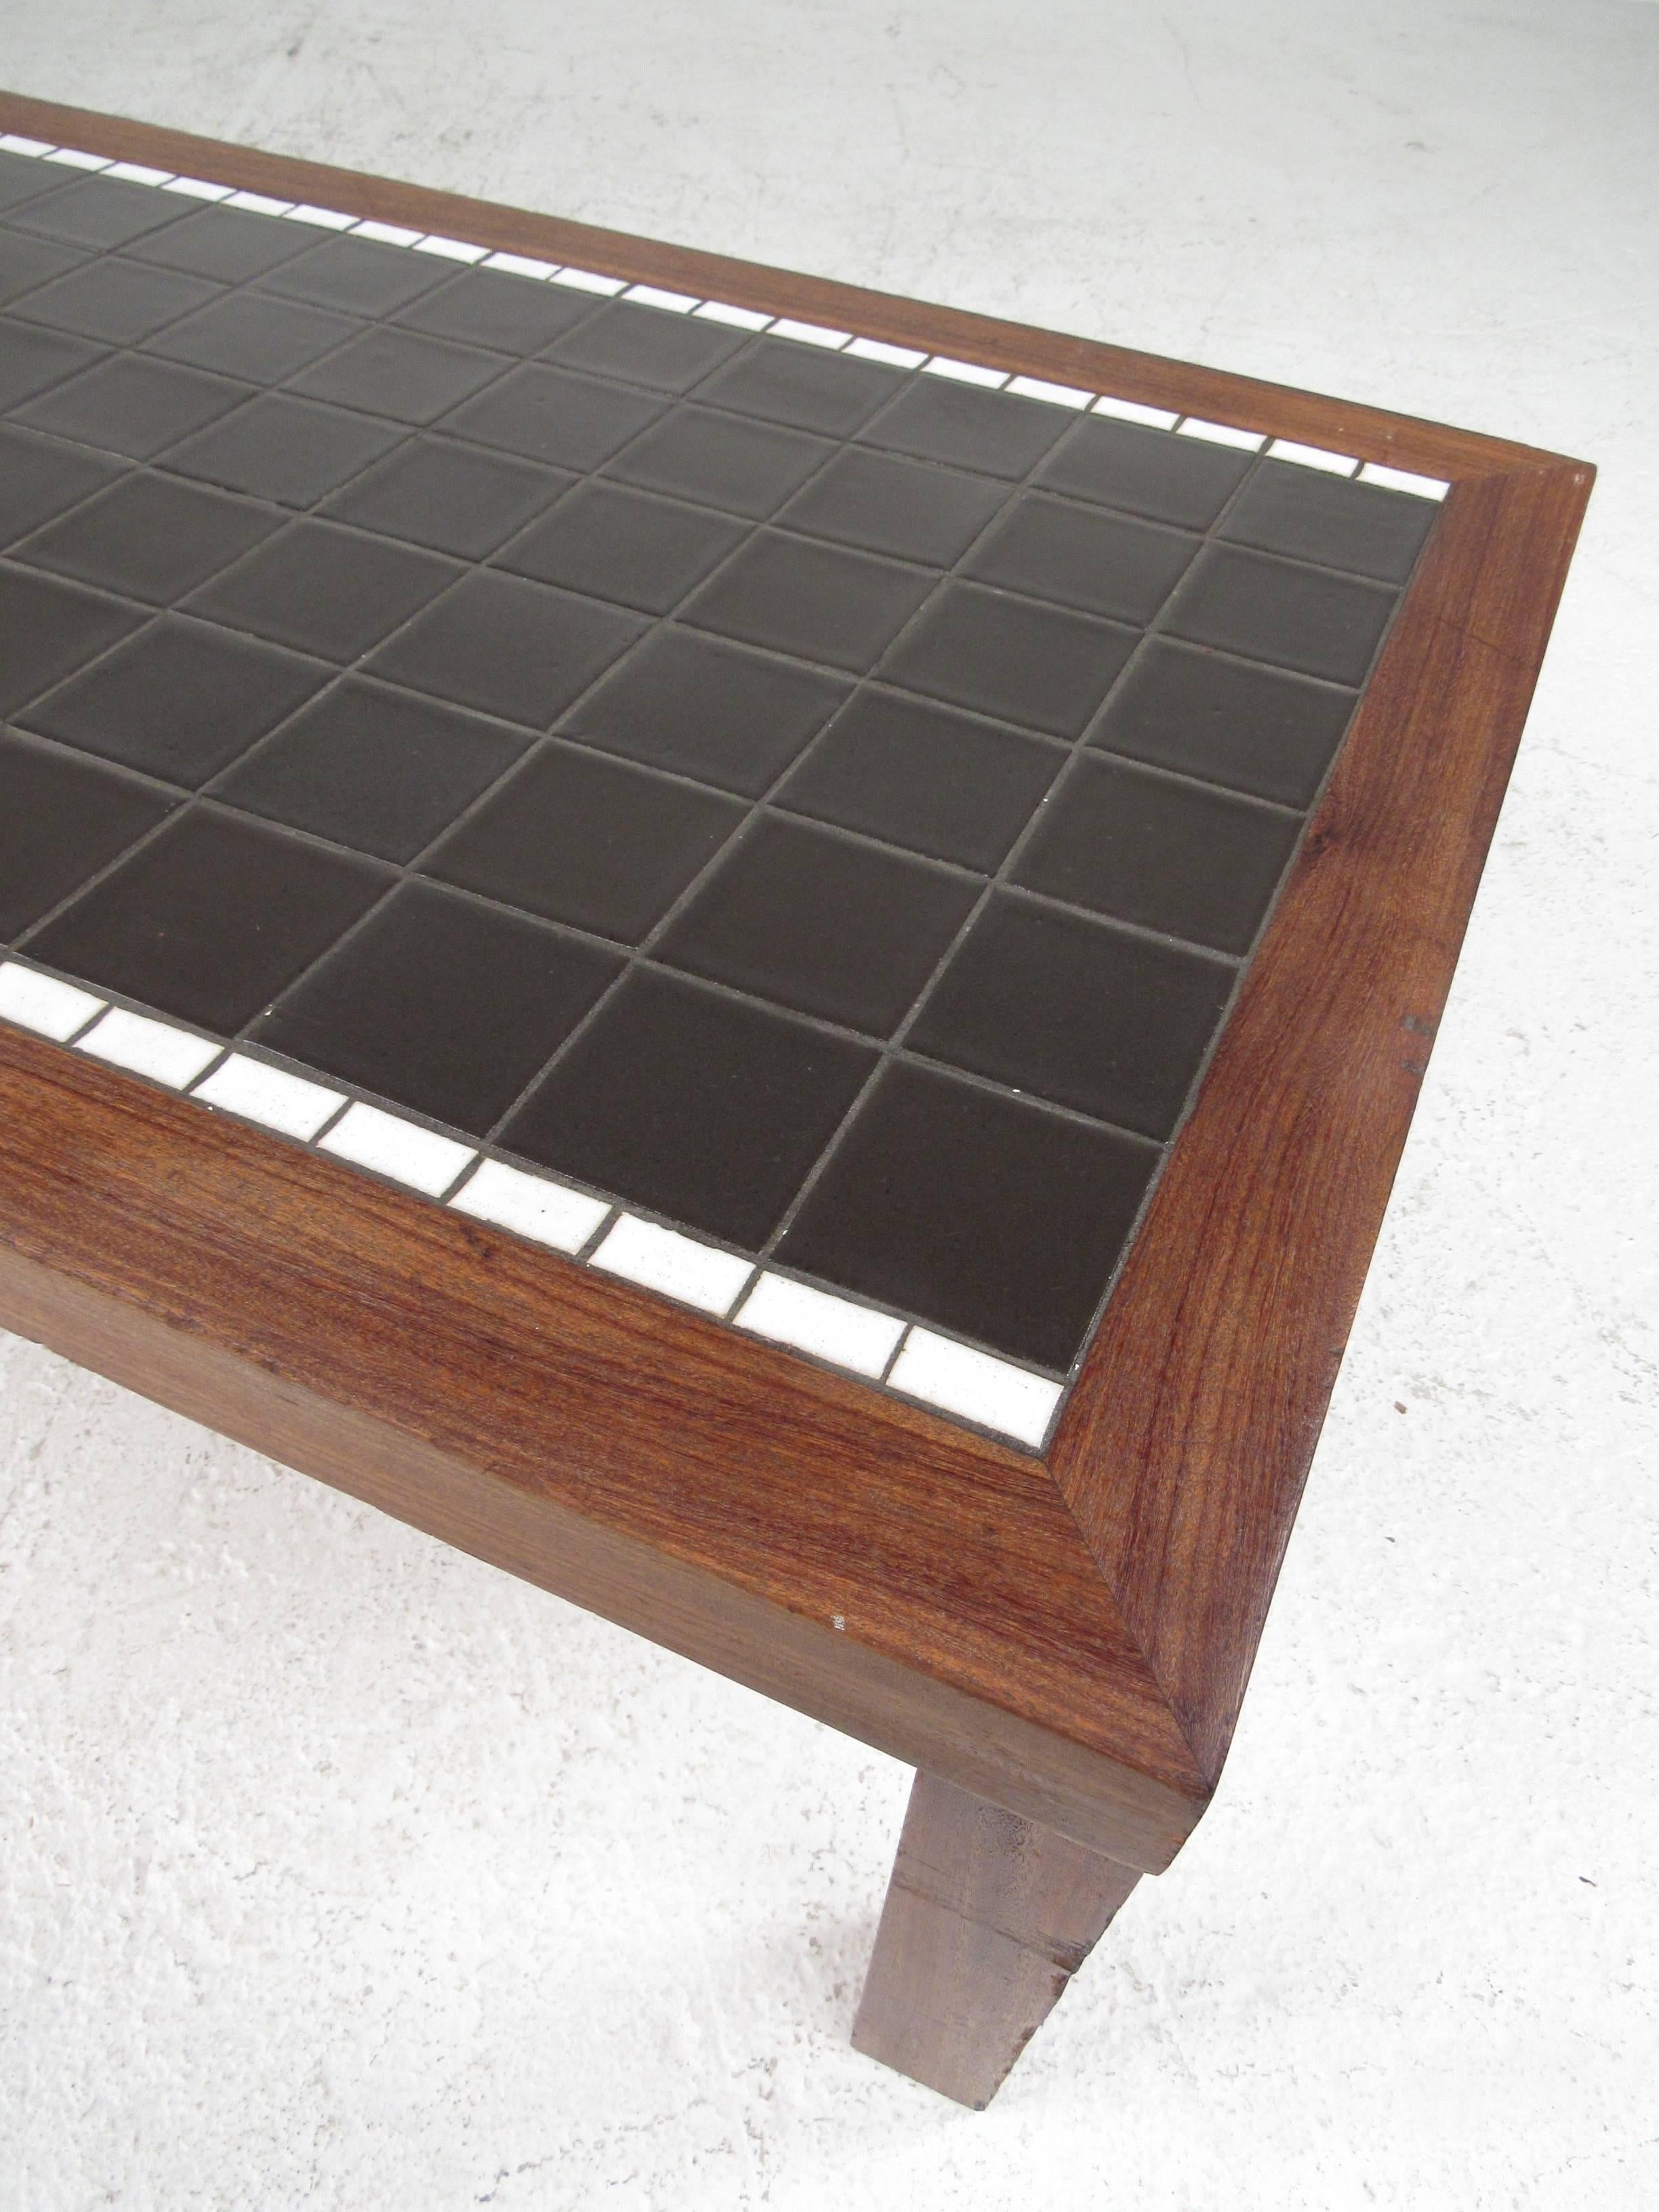 American Long and Low Mid-Century Mosaic Tile Coffee Table by Gordon and Jane Martz